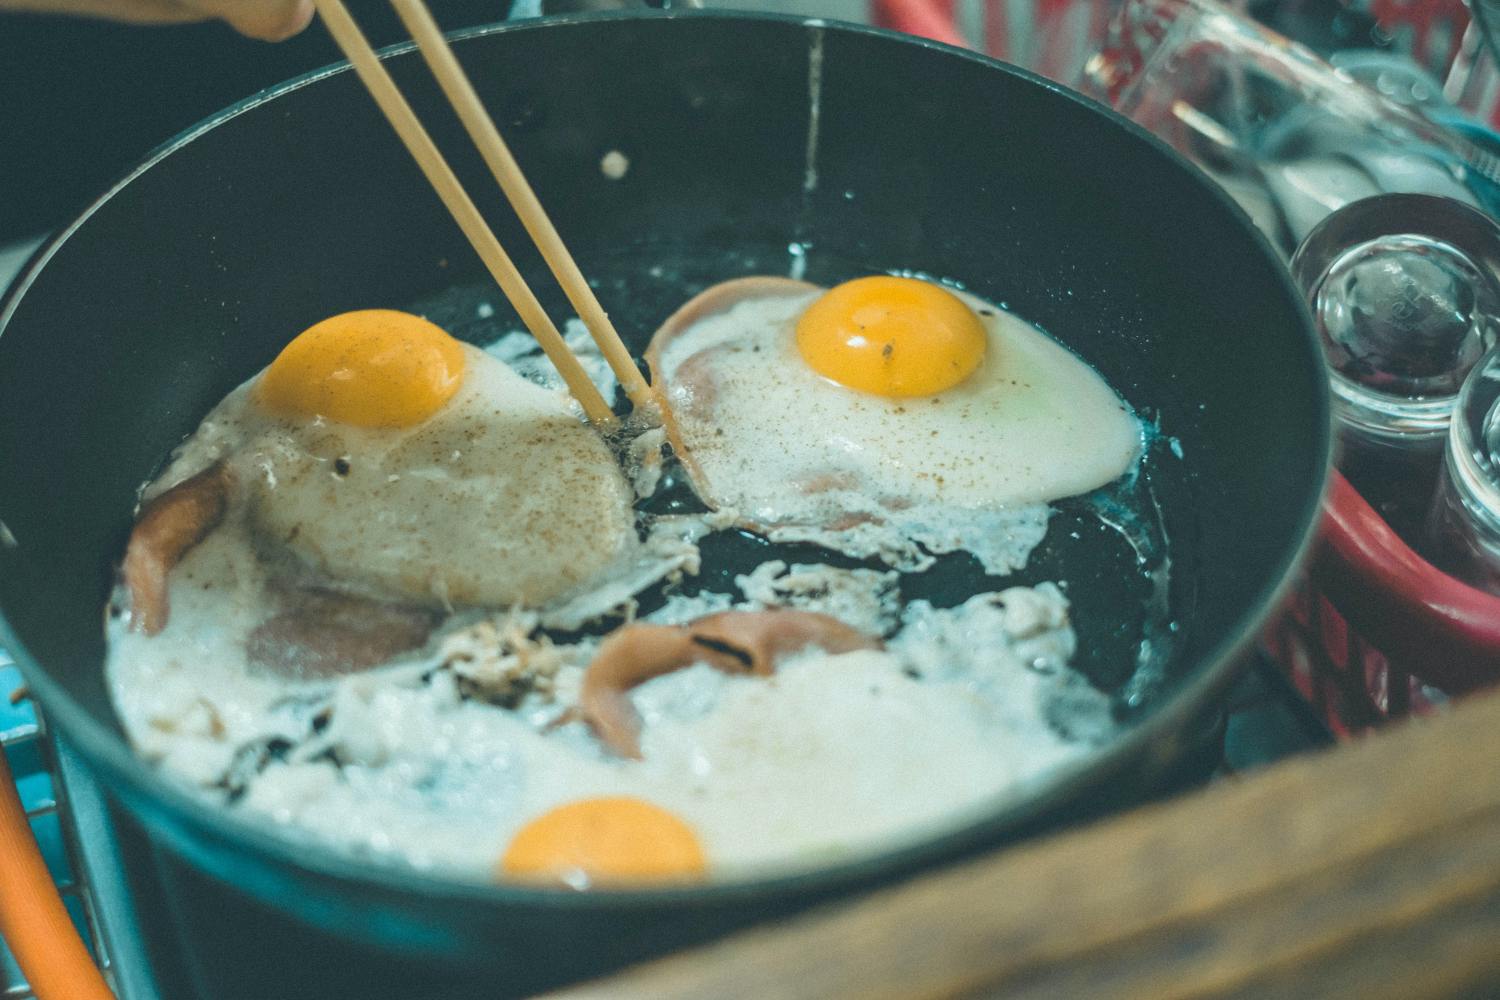 5 quick ways to tell if an egg is bad